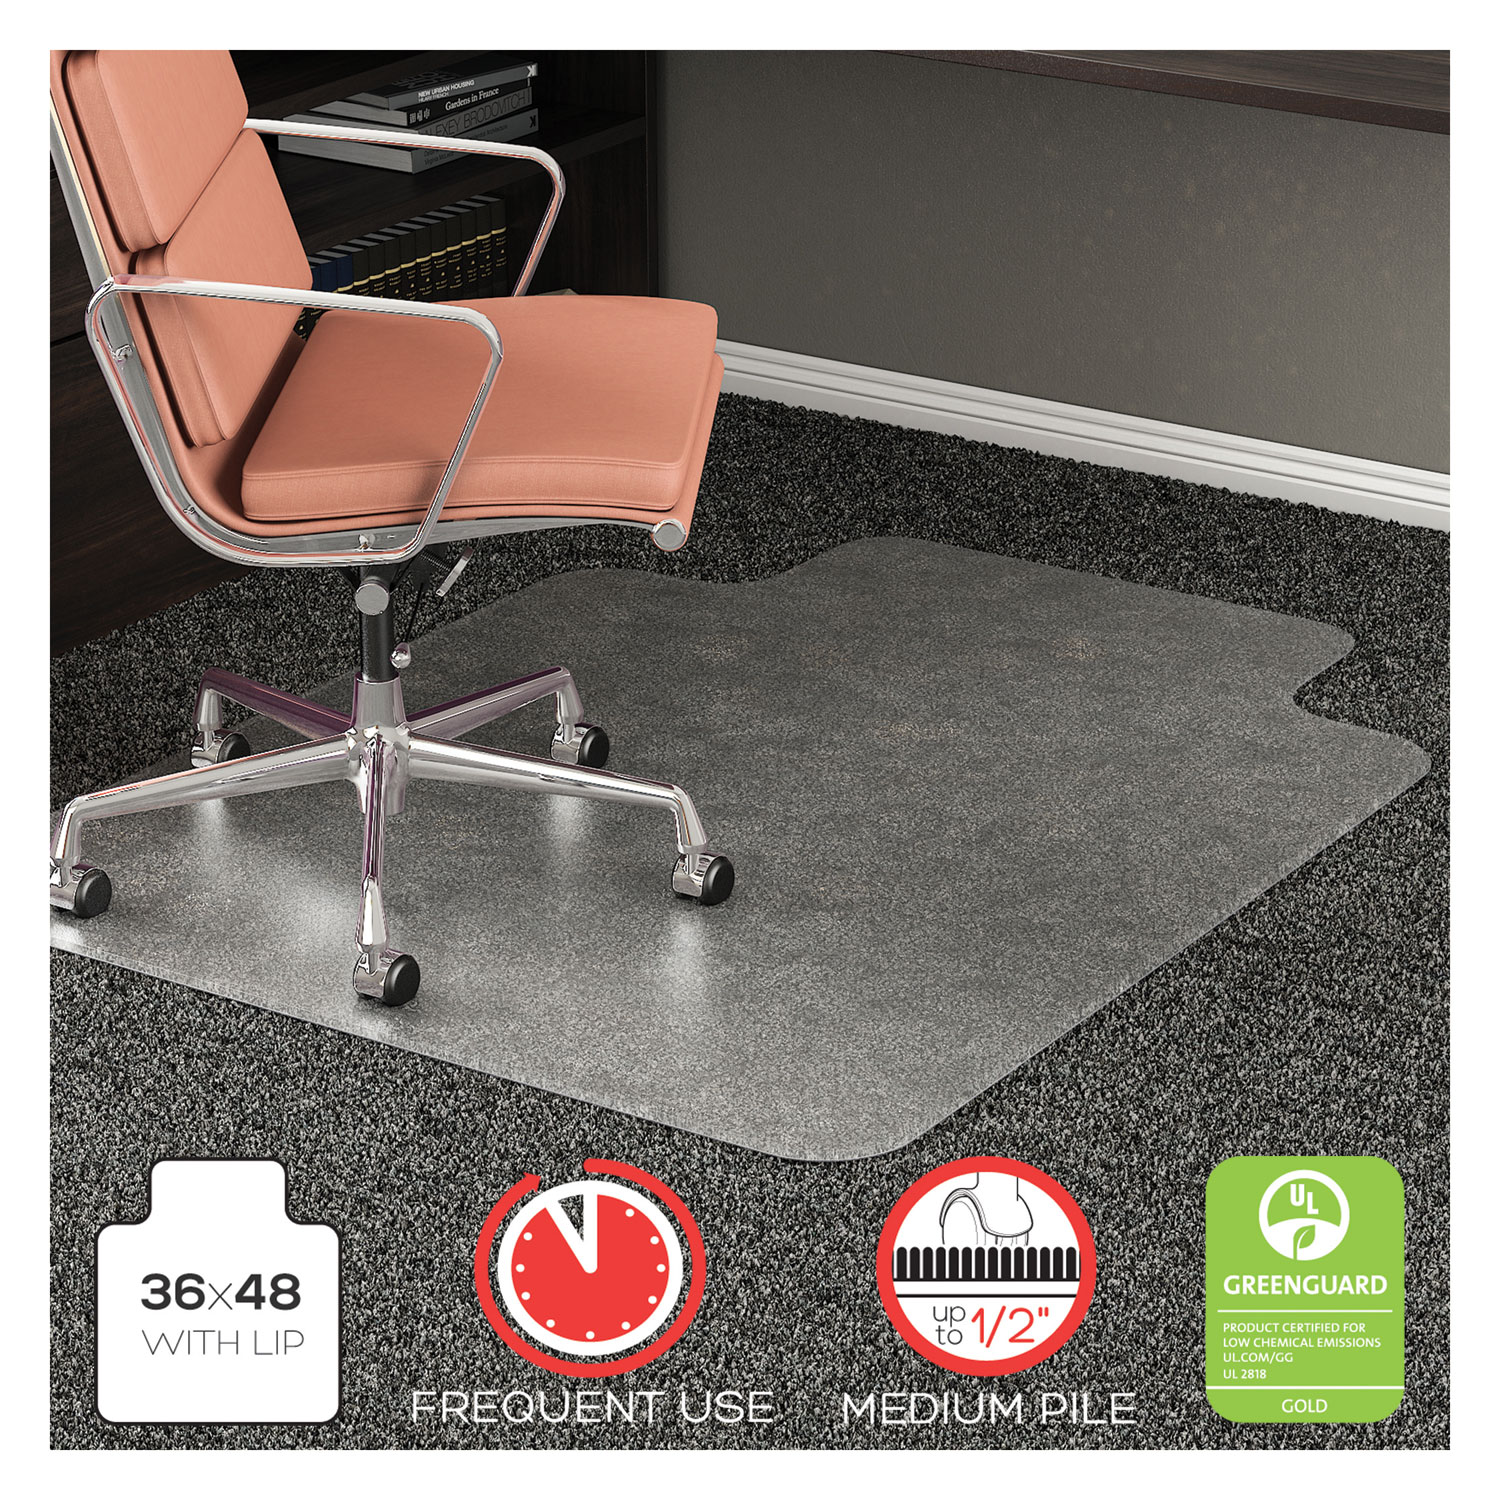  deflecto CM15113 RollaMat Frequent Use Chair Mat, Med Pile Carpet, Flat, 36 x 48, Lipped, Clear (DEFCM15113) 